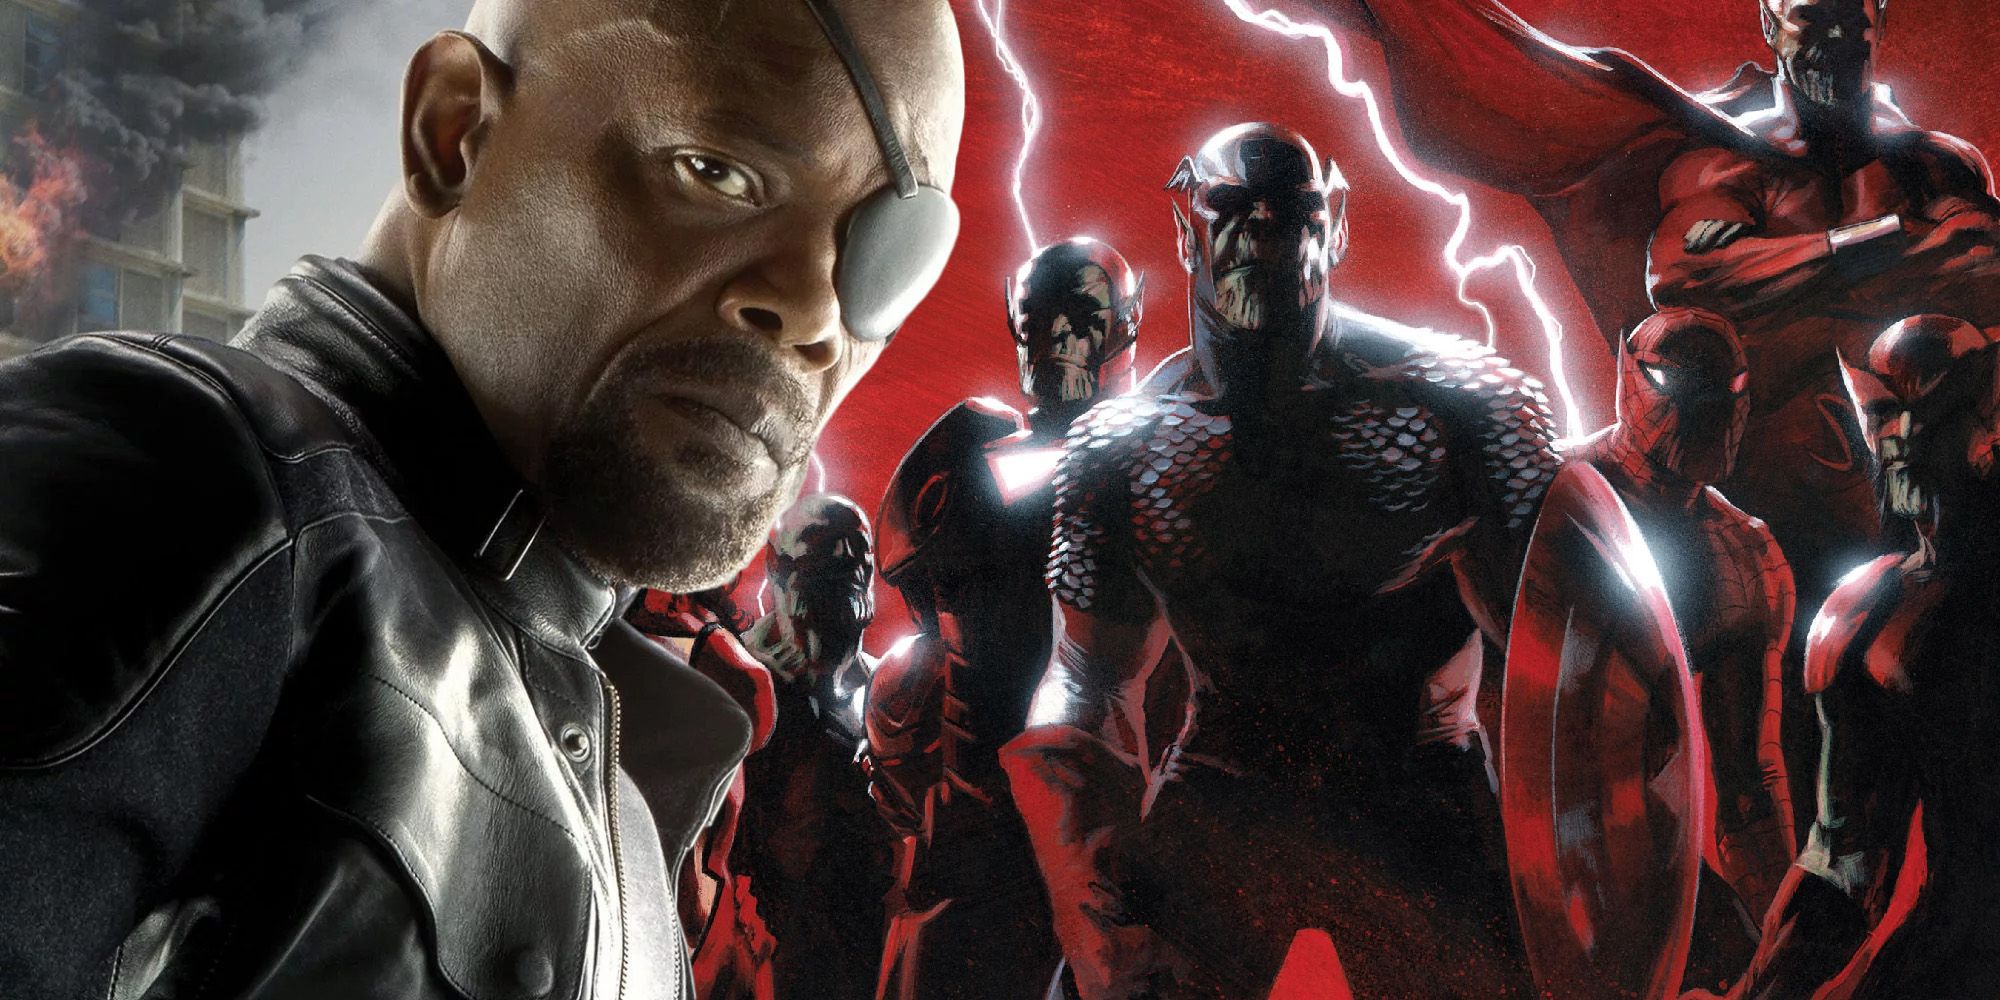 The MCU is bracing for an invasion with its next big show, “Secret